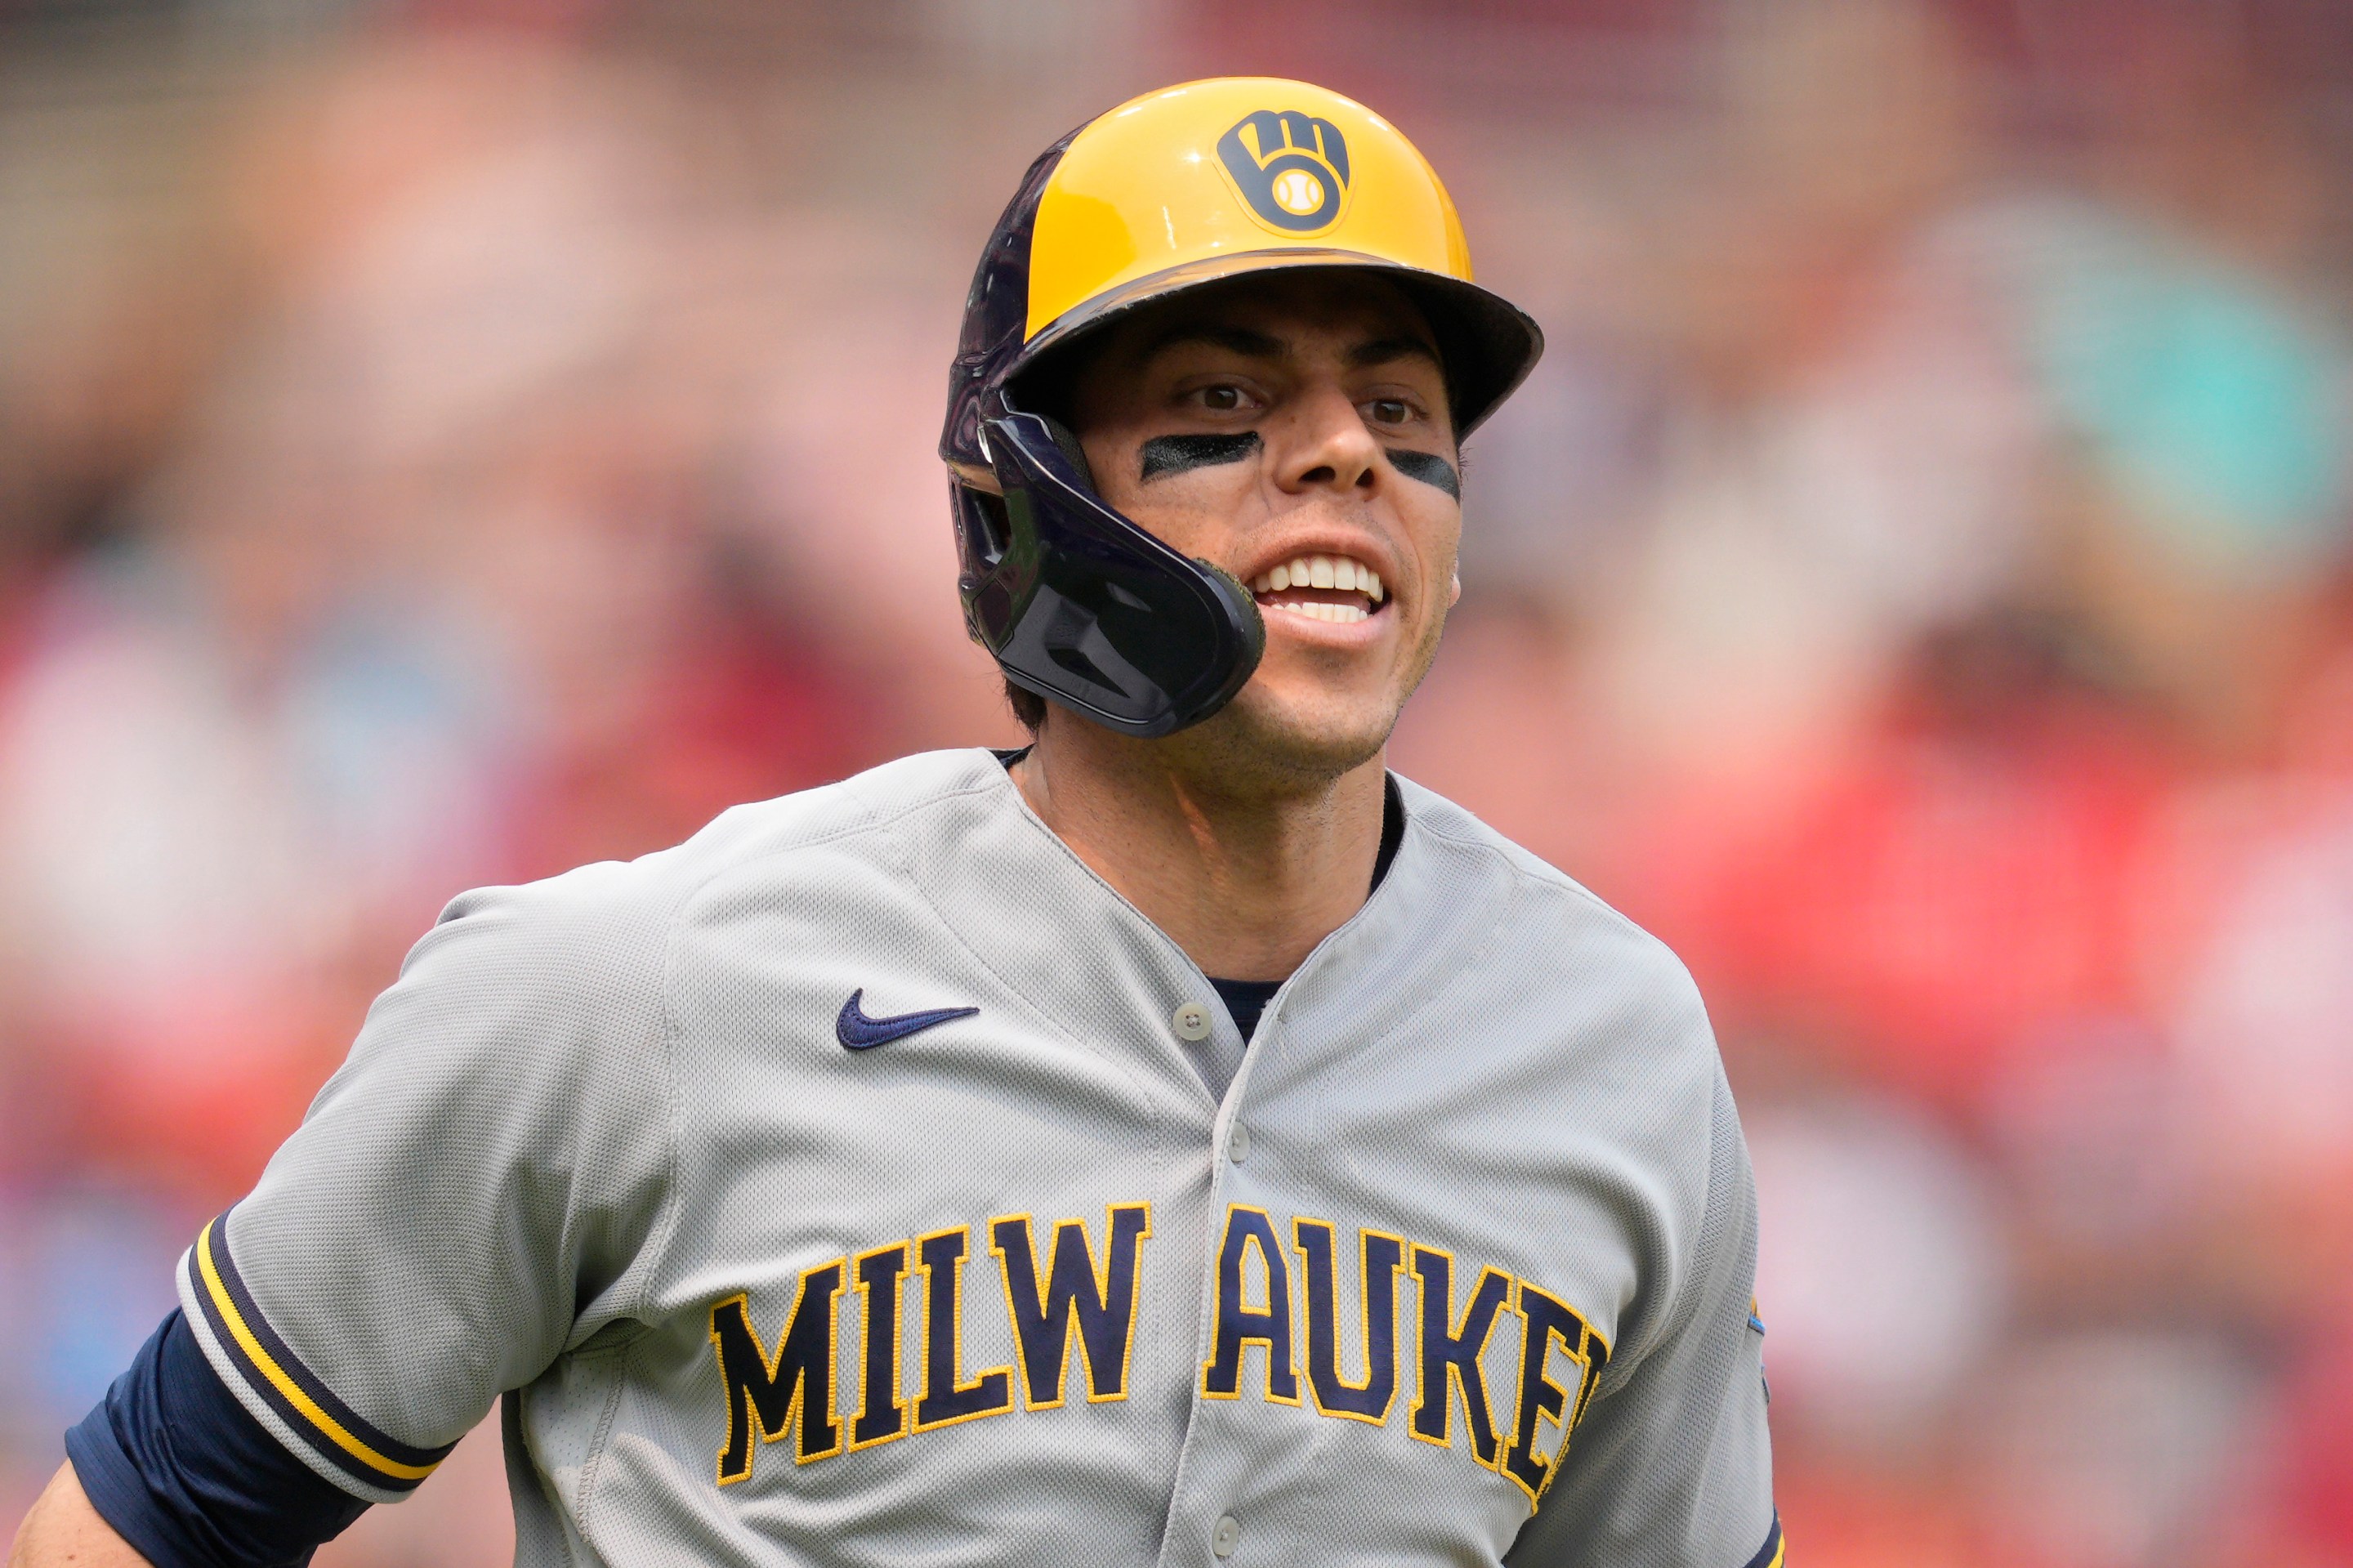 Christian Yelich #22 of the Milwaukee Brewers reacts after drawing a walk during the seventh inning of a baseball game against the Cincinnati Reds at Great American Ball Park on July 16, 2023 in Cincinnati, Ohio.